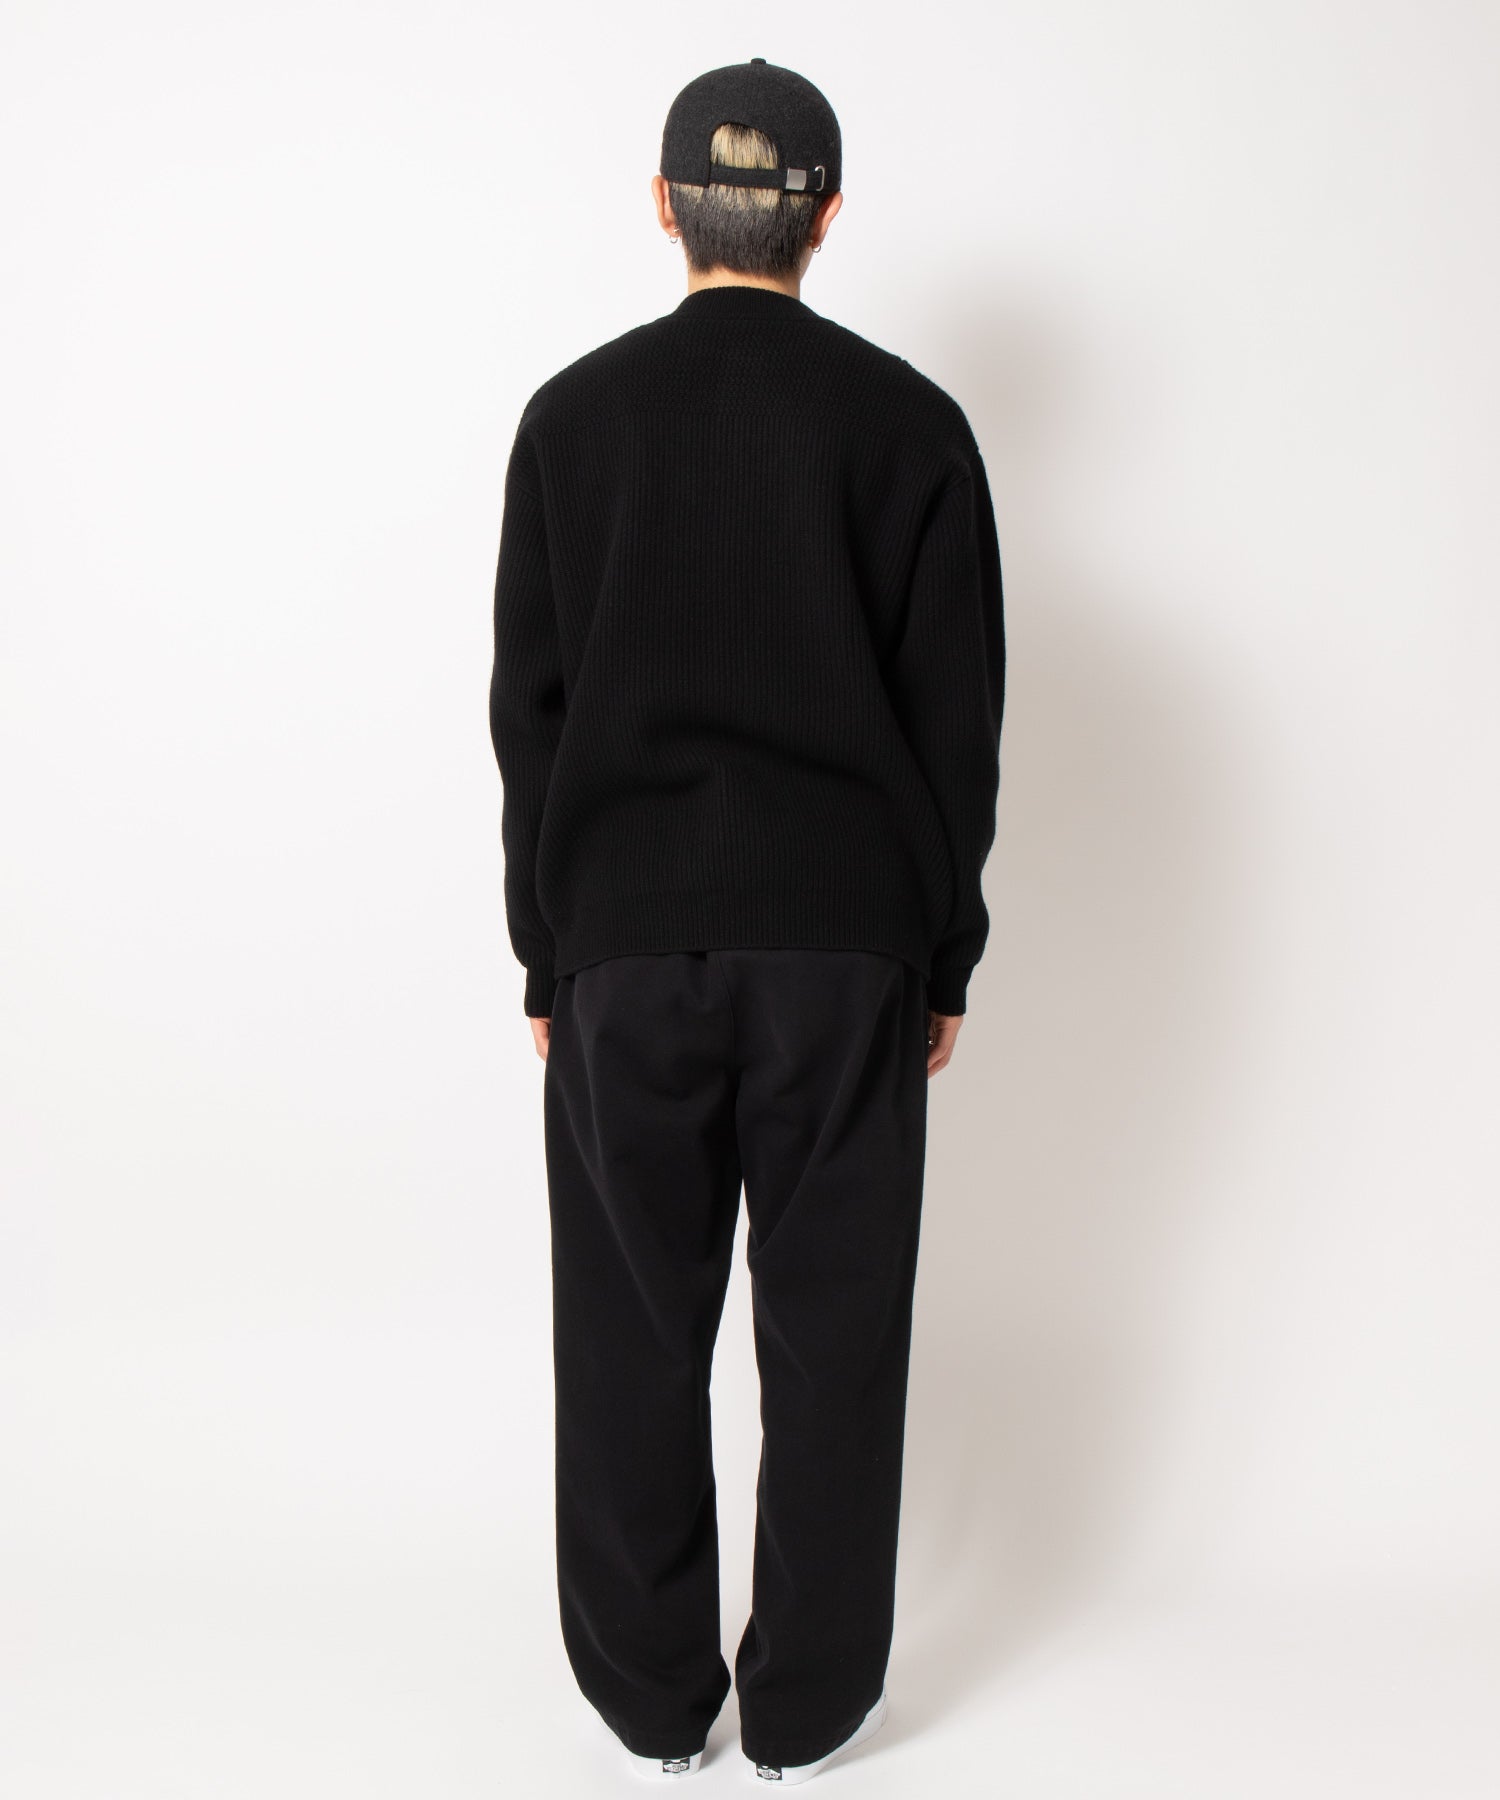 Double Loop Trousers Twill